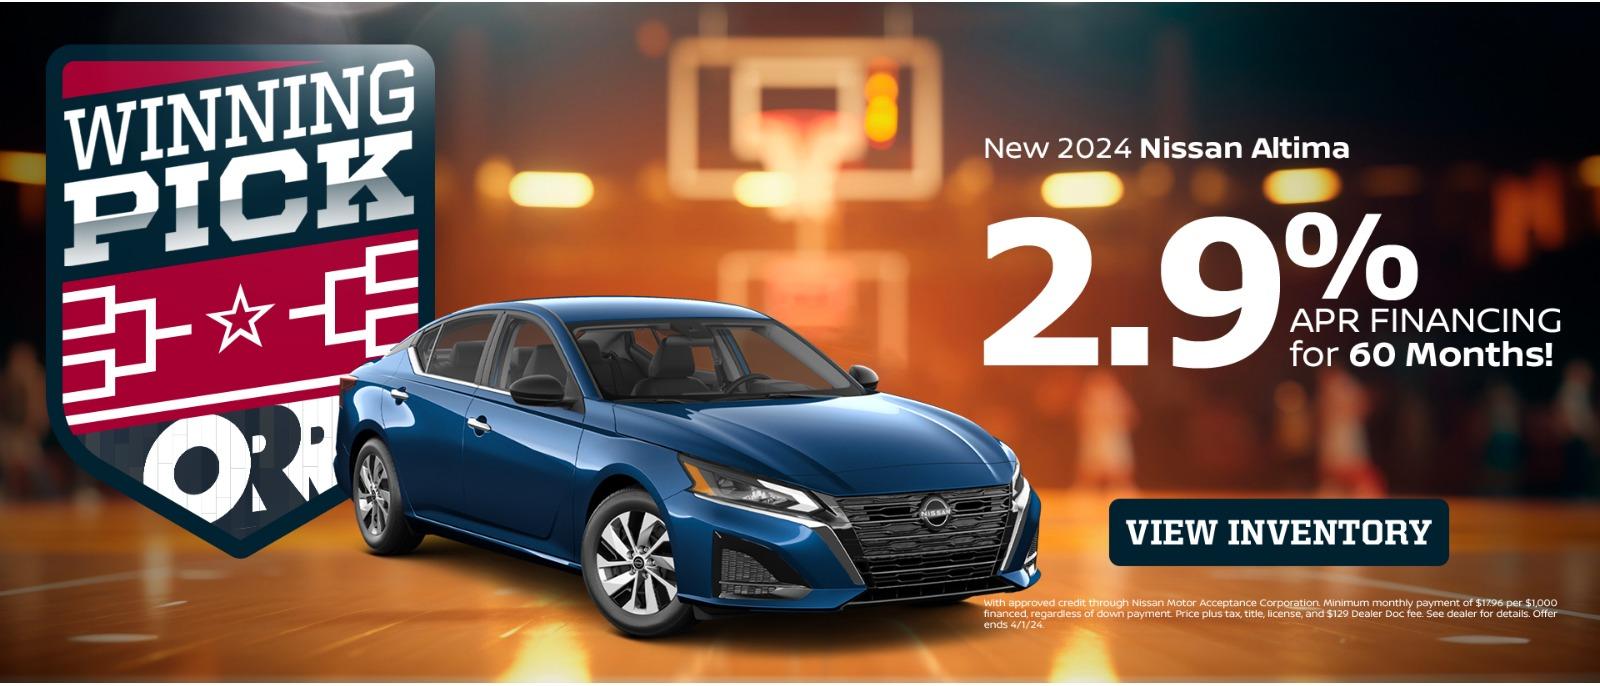 WINNING PICK ⇒*Œ OR 包 New 2024 Nissan Altima 2.9% APR FINANCING for 60 Months! VIEW INVENTORY with approved credit through Nissan Motor Acceptance Corporation Minimum monthly payment of $1796 per $1,000 financed, regardless of down payment Price plus tax, title, license, and $129 Dealer Doc fee See dealer for details Offer ends 4/1/24